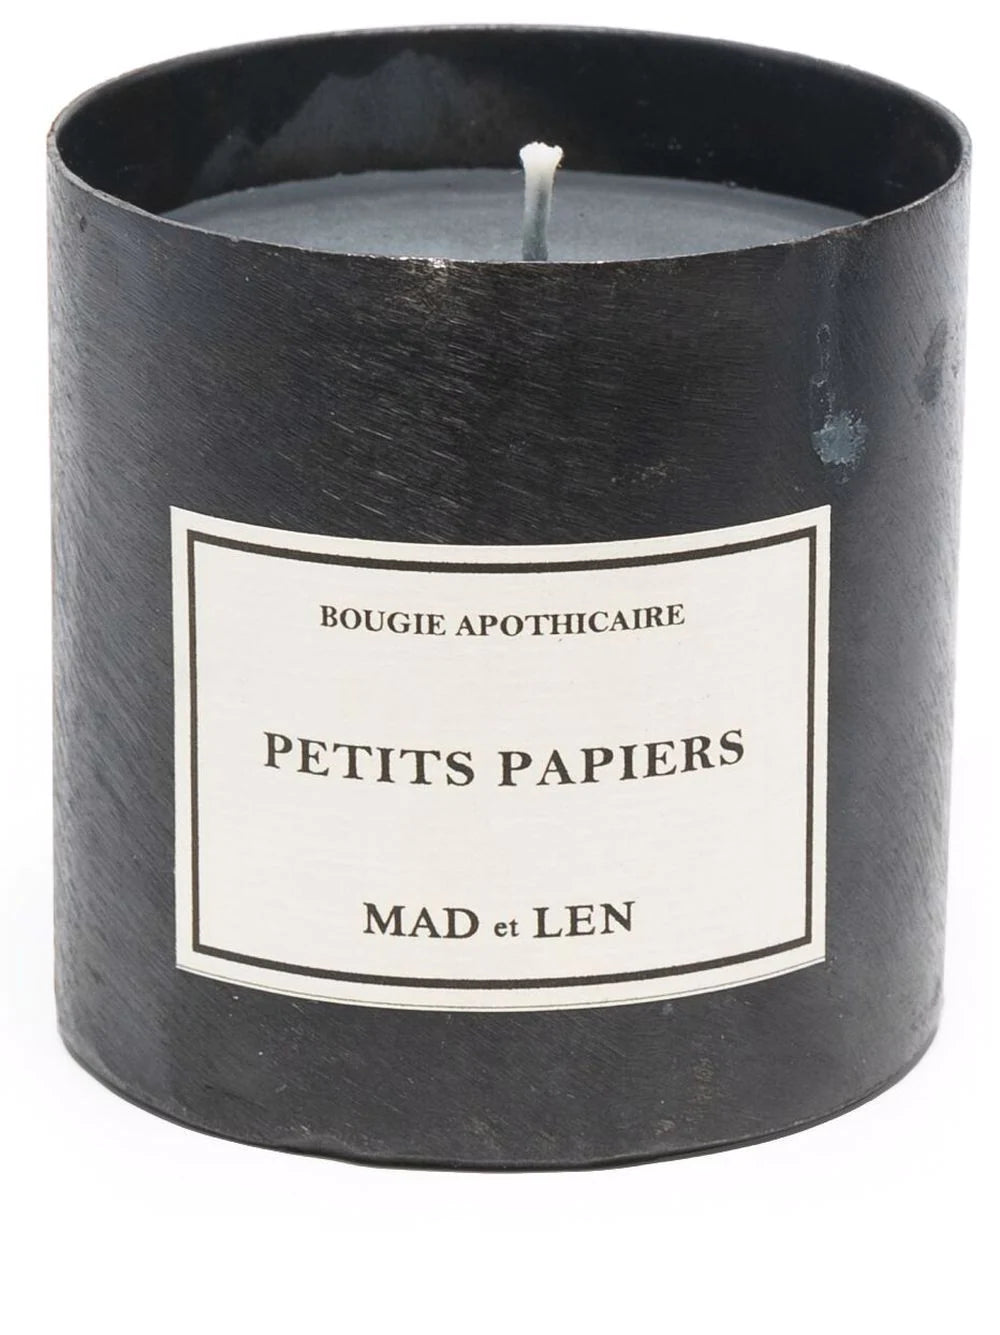 SCENTED CANDLE PETITS PAPIERS, BLACK WAX - $150.00